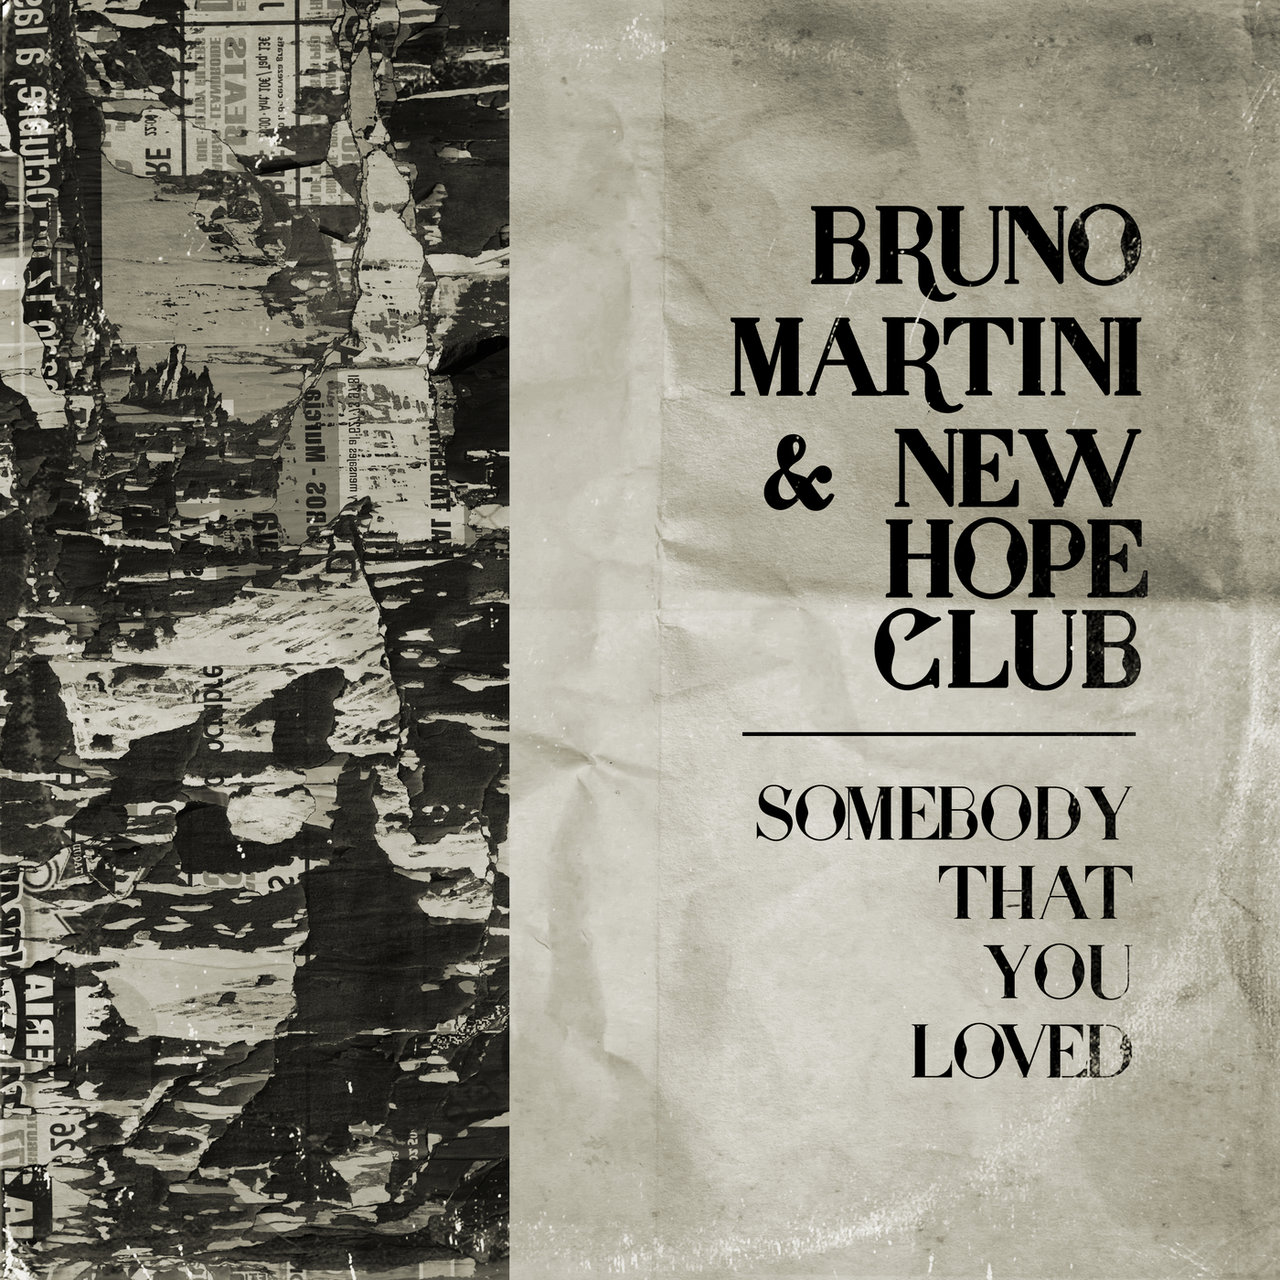 Bruno Martini & New Hope Club Somebody That You Loved cover artwork